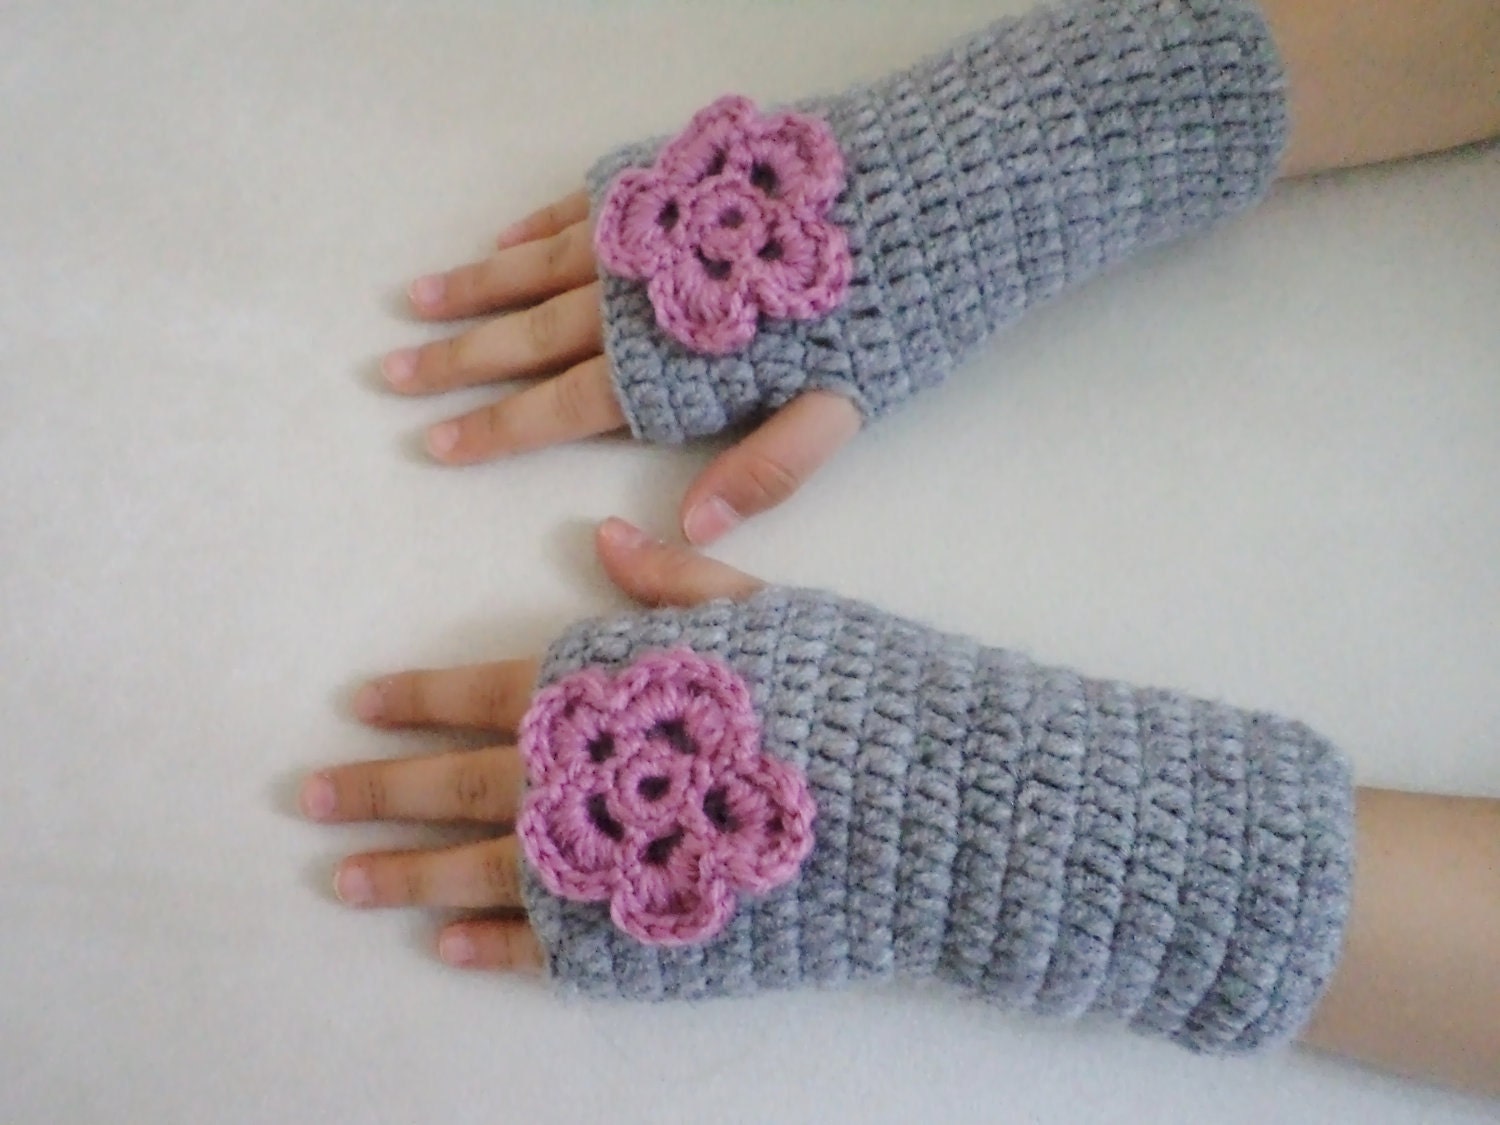 Gloves, Kids girl gloves,  holidays, grey gloves with pink flower, fingerless mittens, holiday gifts, girls gifts, gift idea - BloomedFlower